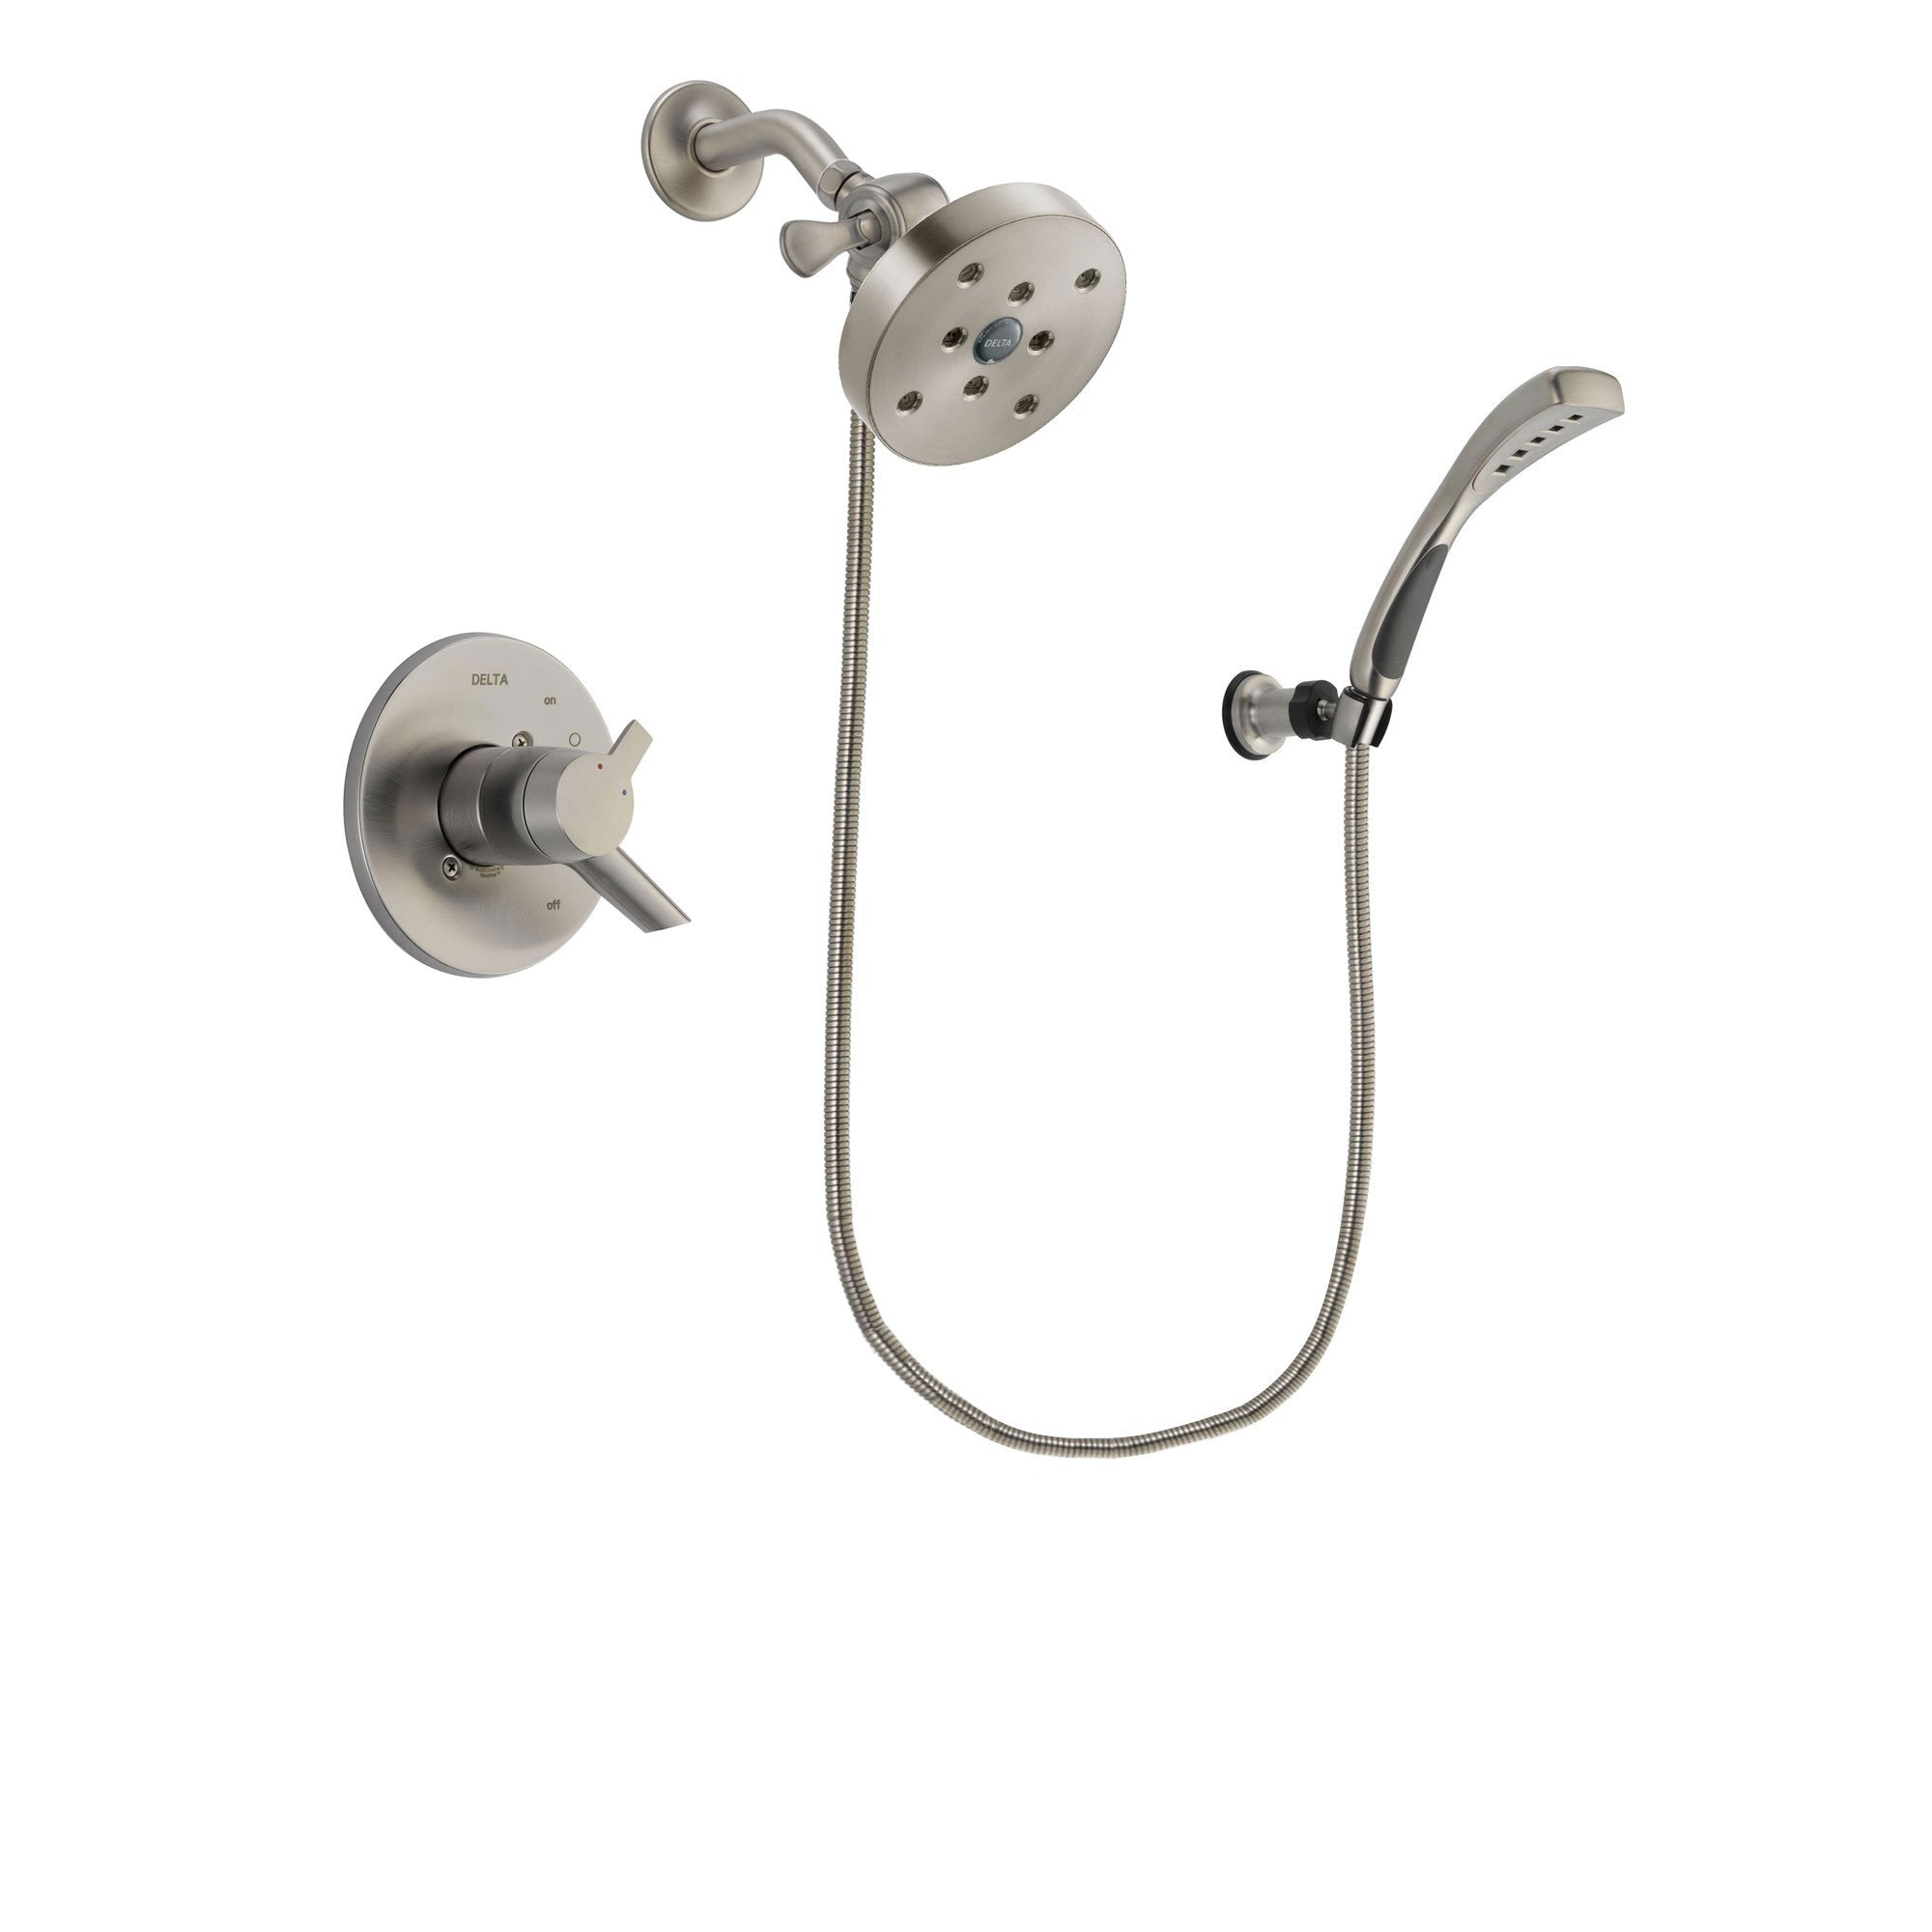 Delta Compel Stainless Steel Finish Dual Control Shower Faucet System Package with 5-1/2 inch Shower Head and Wall Mounted Handshower Includes Rough-in Valve DSP1912V